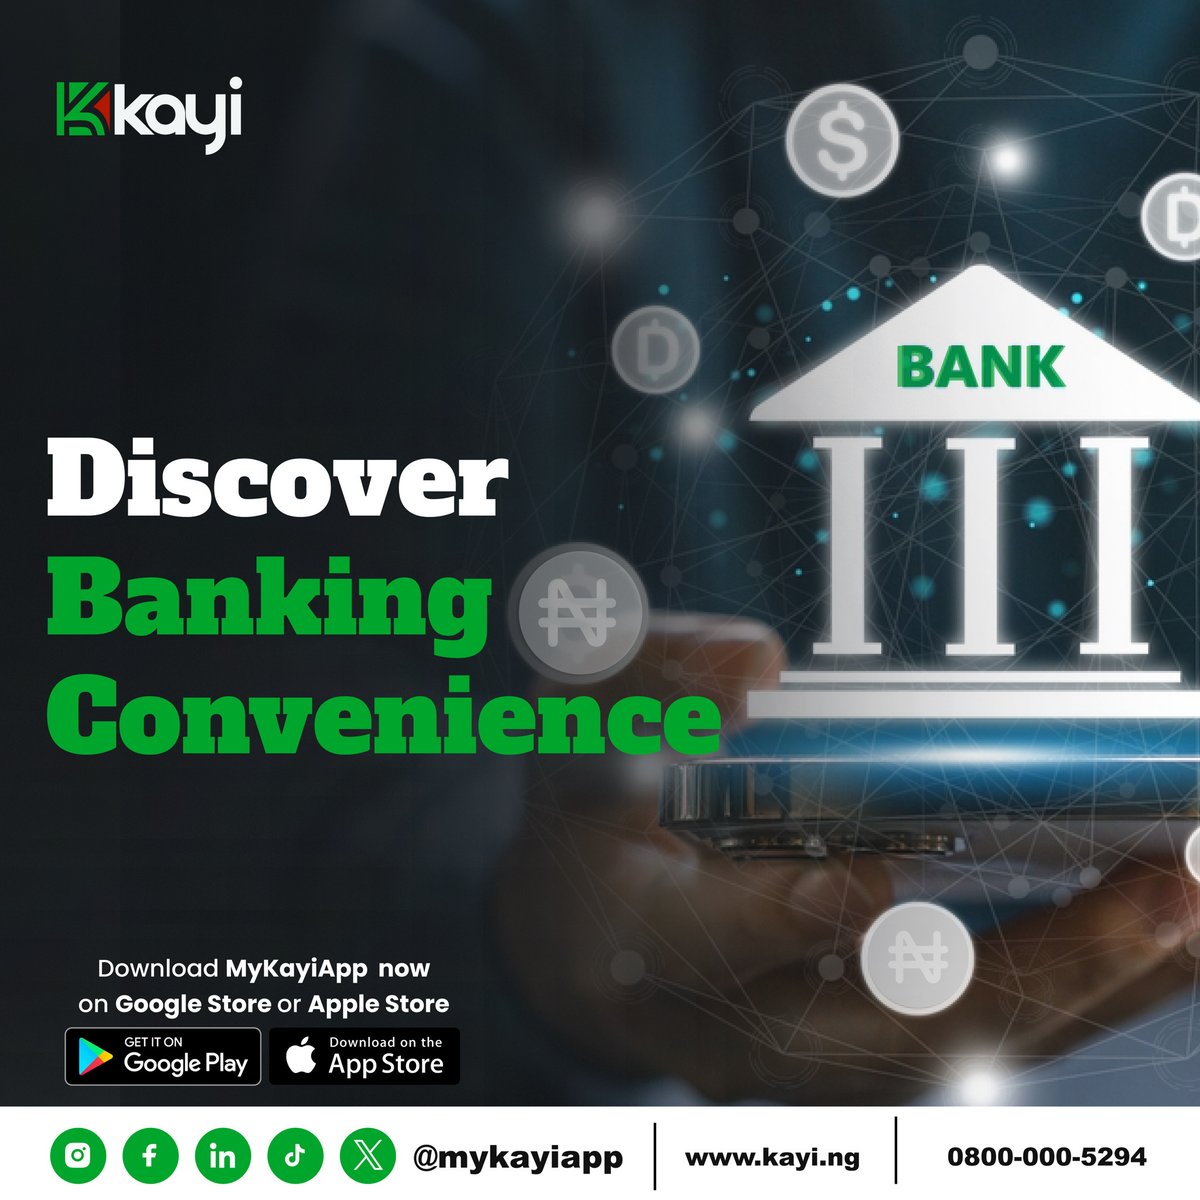 Calling on all rural community residents! Discover the convenience of banking with Kayiapp. Download the application today from the Google Play Store and Apple App Store to begin your journey.

#MyKayiApp #NowLive #Kayiway #DownloadNow #Bankingwithoutlimits #downloadmykayiapp